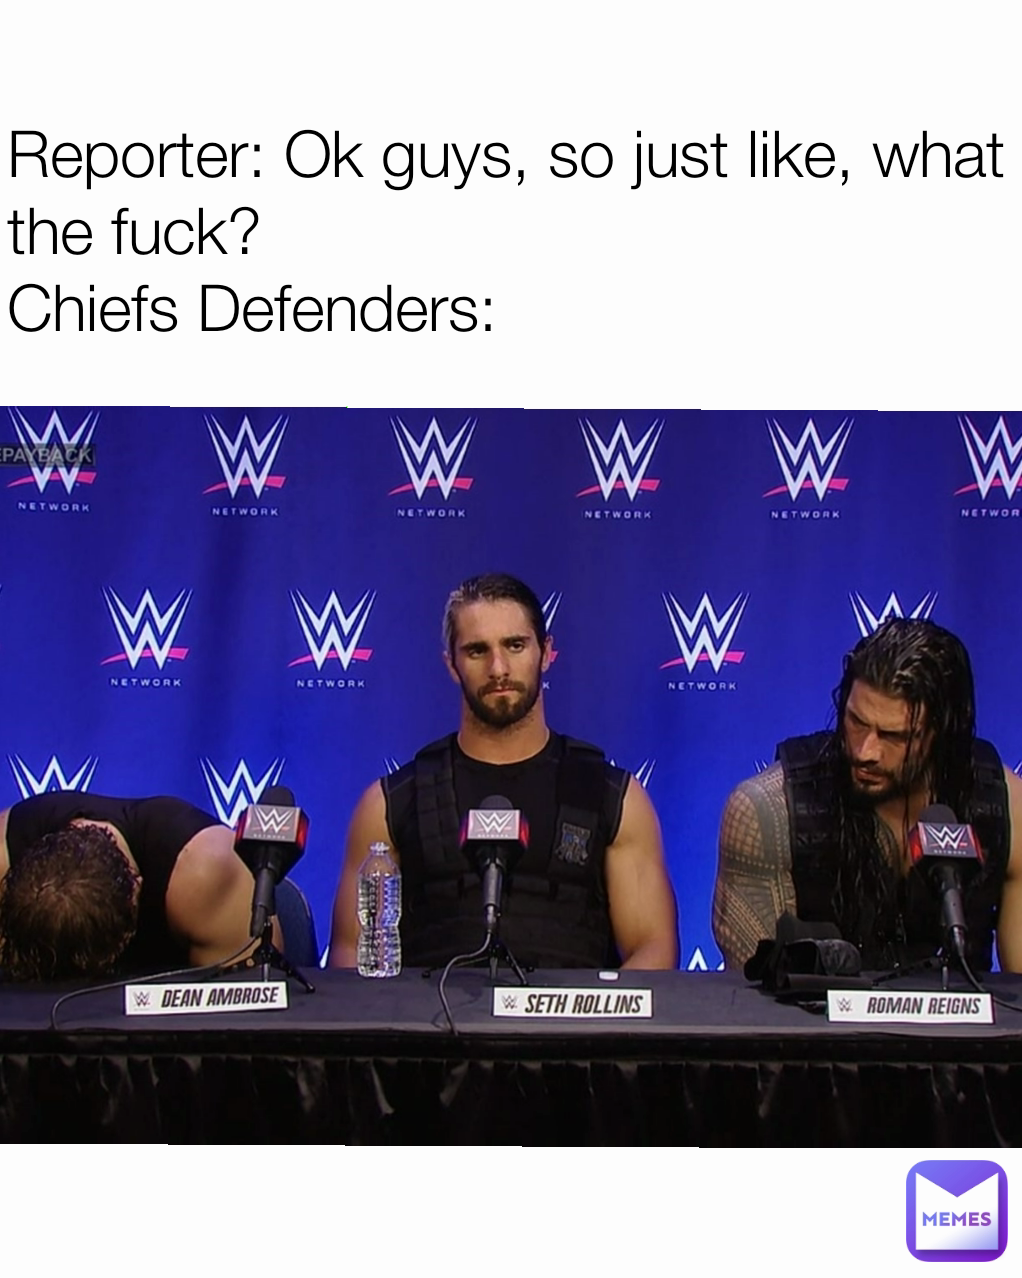 Reporter: Ok guys, so just like, what the fuck?
Chiefs Defenders: